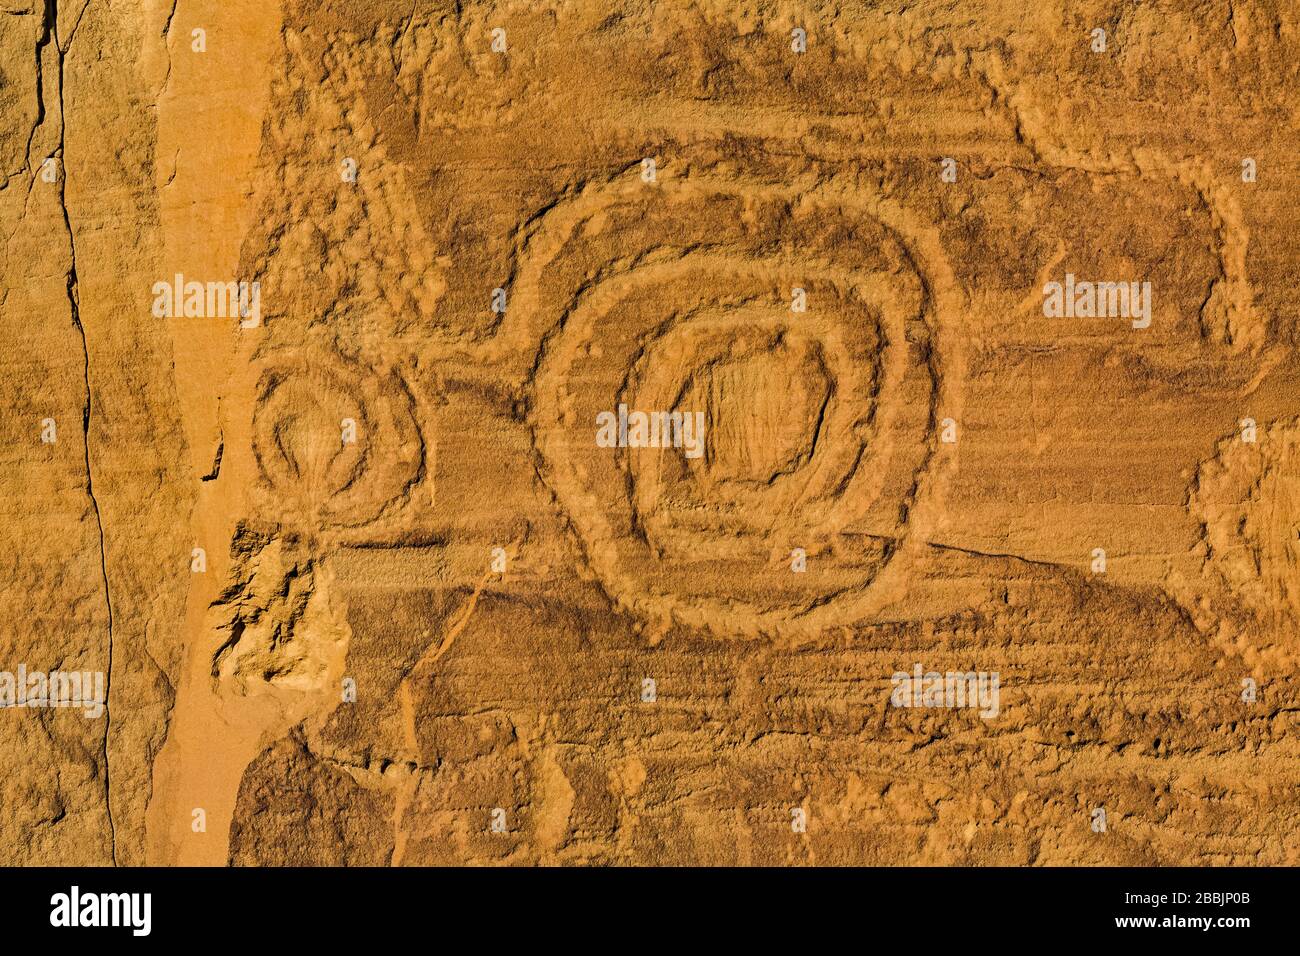 Spiral Petroglyph carved by ancestral Pueblo peoples, along the Petroglyph Trail in Chaco Culture National Historical Park, New Mexico, USA Stock Photo